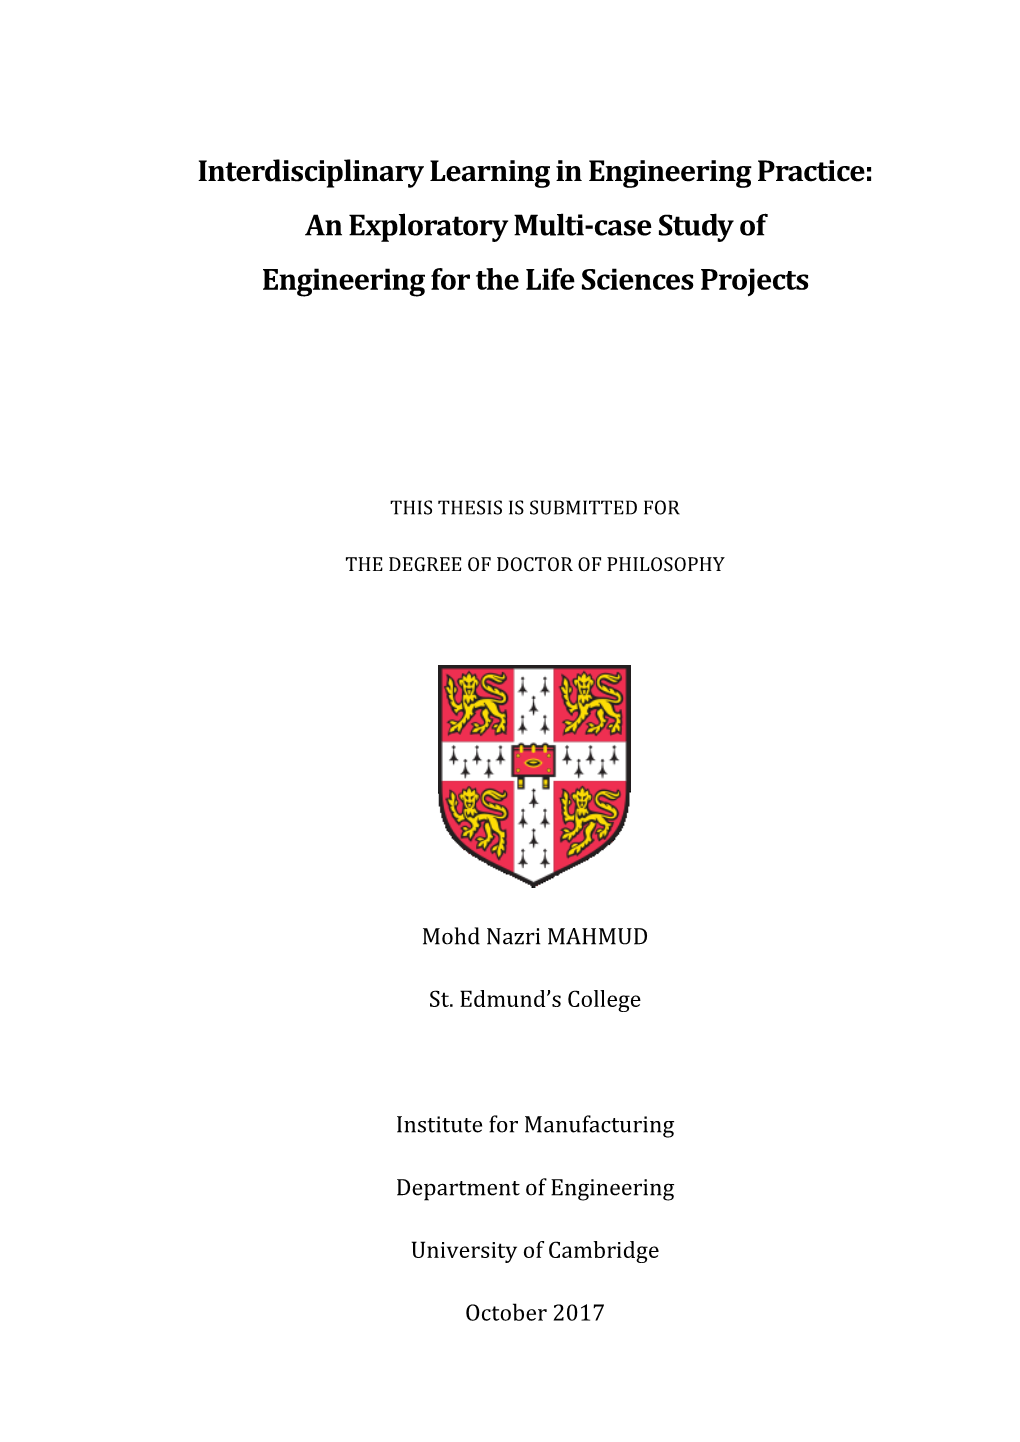 Interdisciplinary Learning in Engineering Practice: an Exploratory Multi-Case Study of Engineering for the Life Sciences Projects